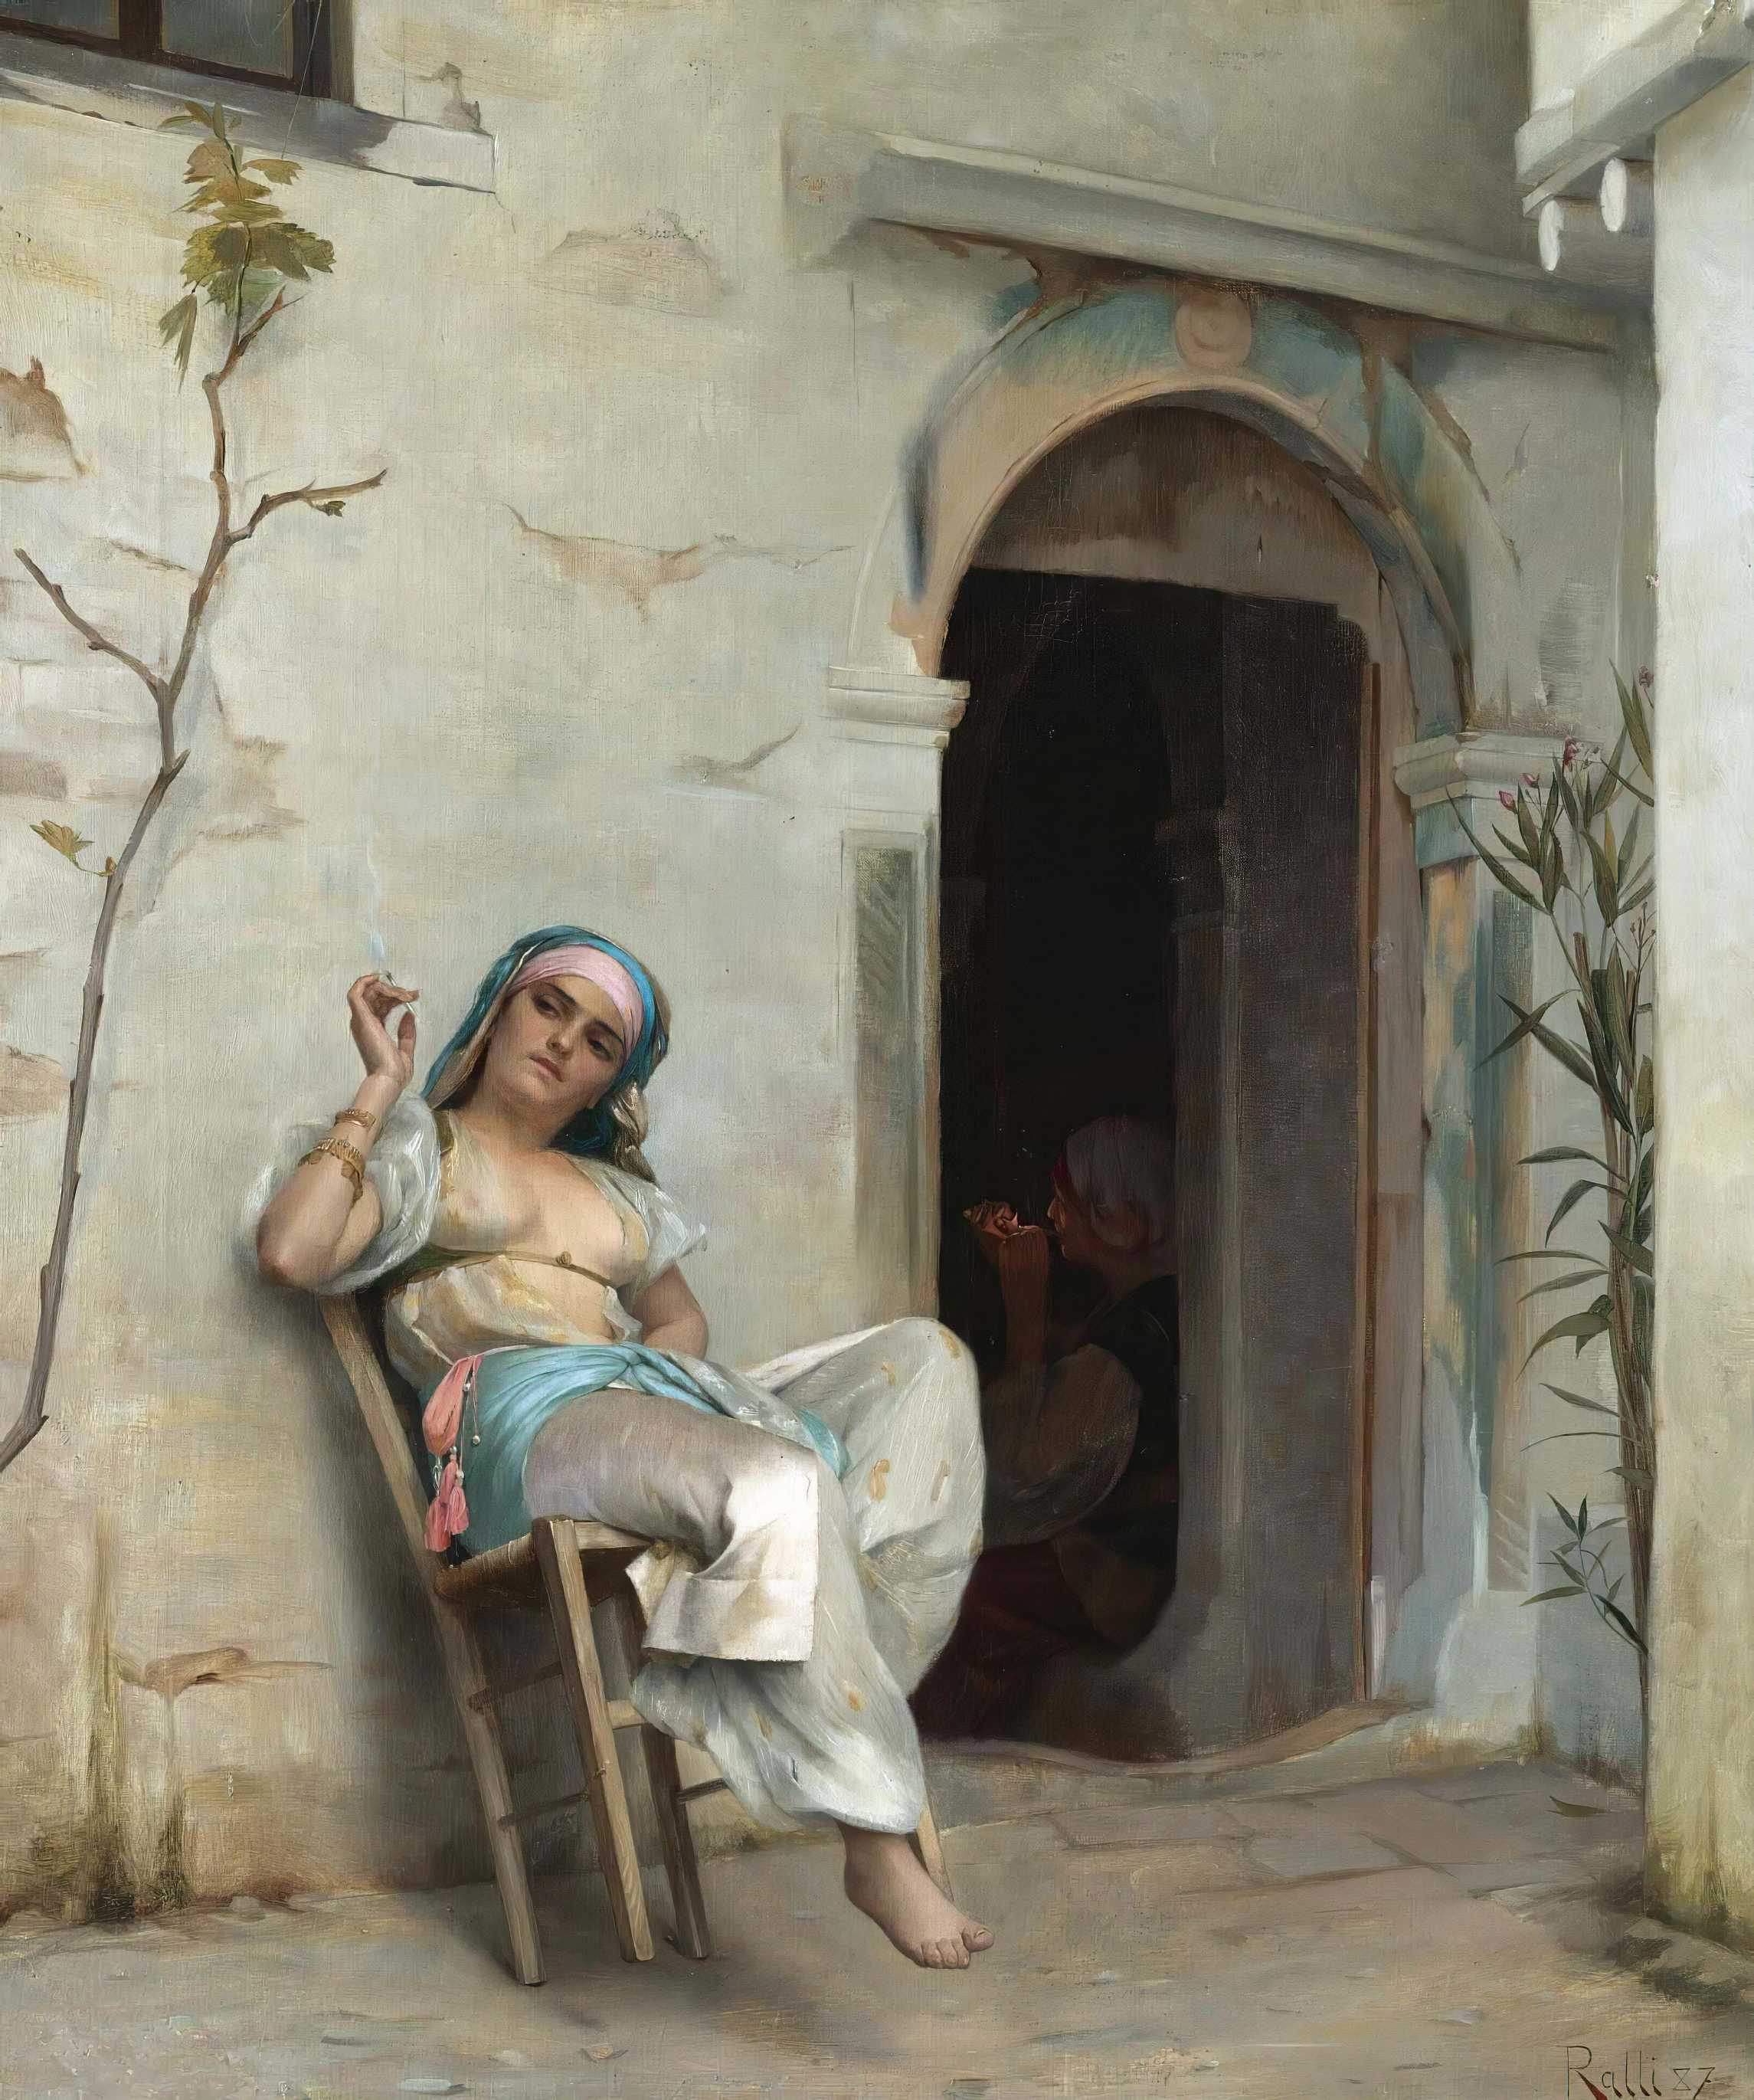 Find out more about Theodoros Ralli - Turkish Woman Smoking